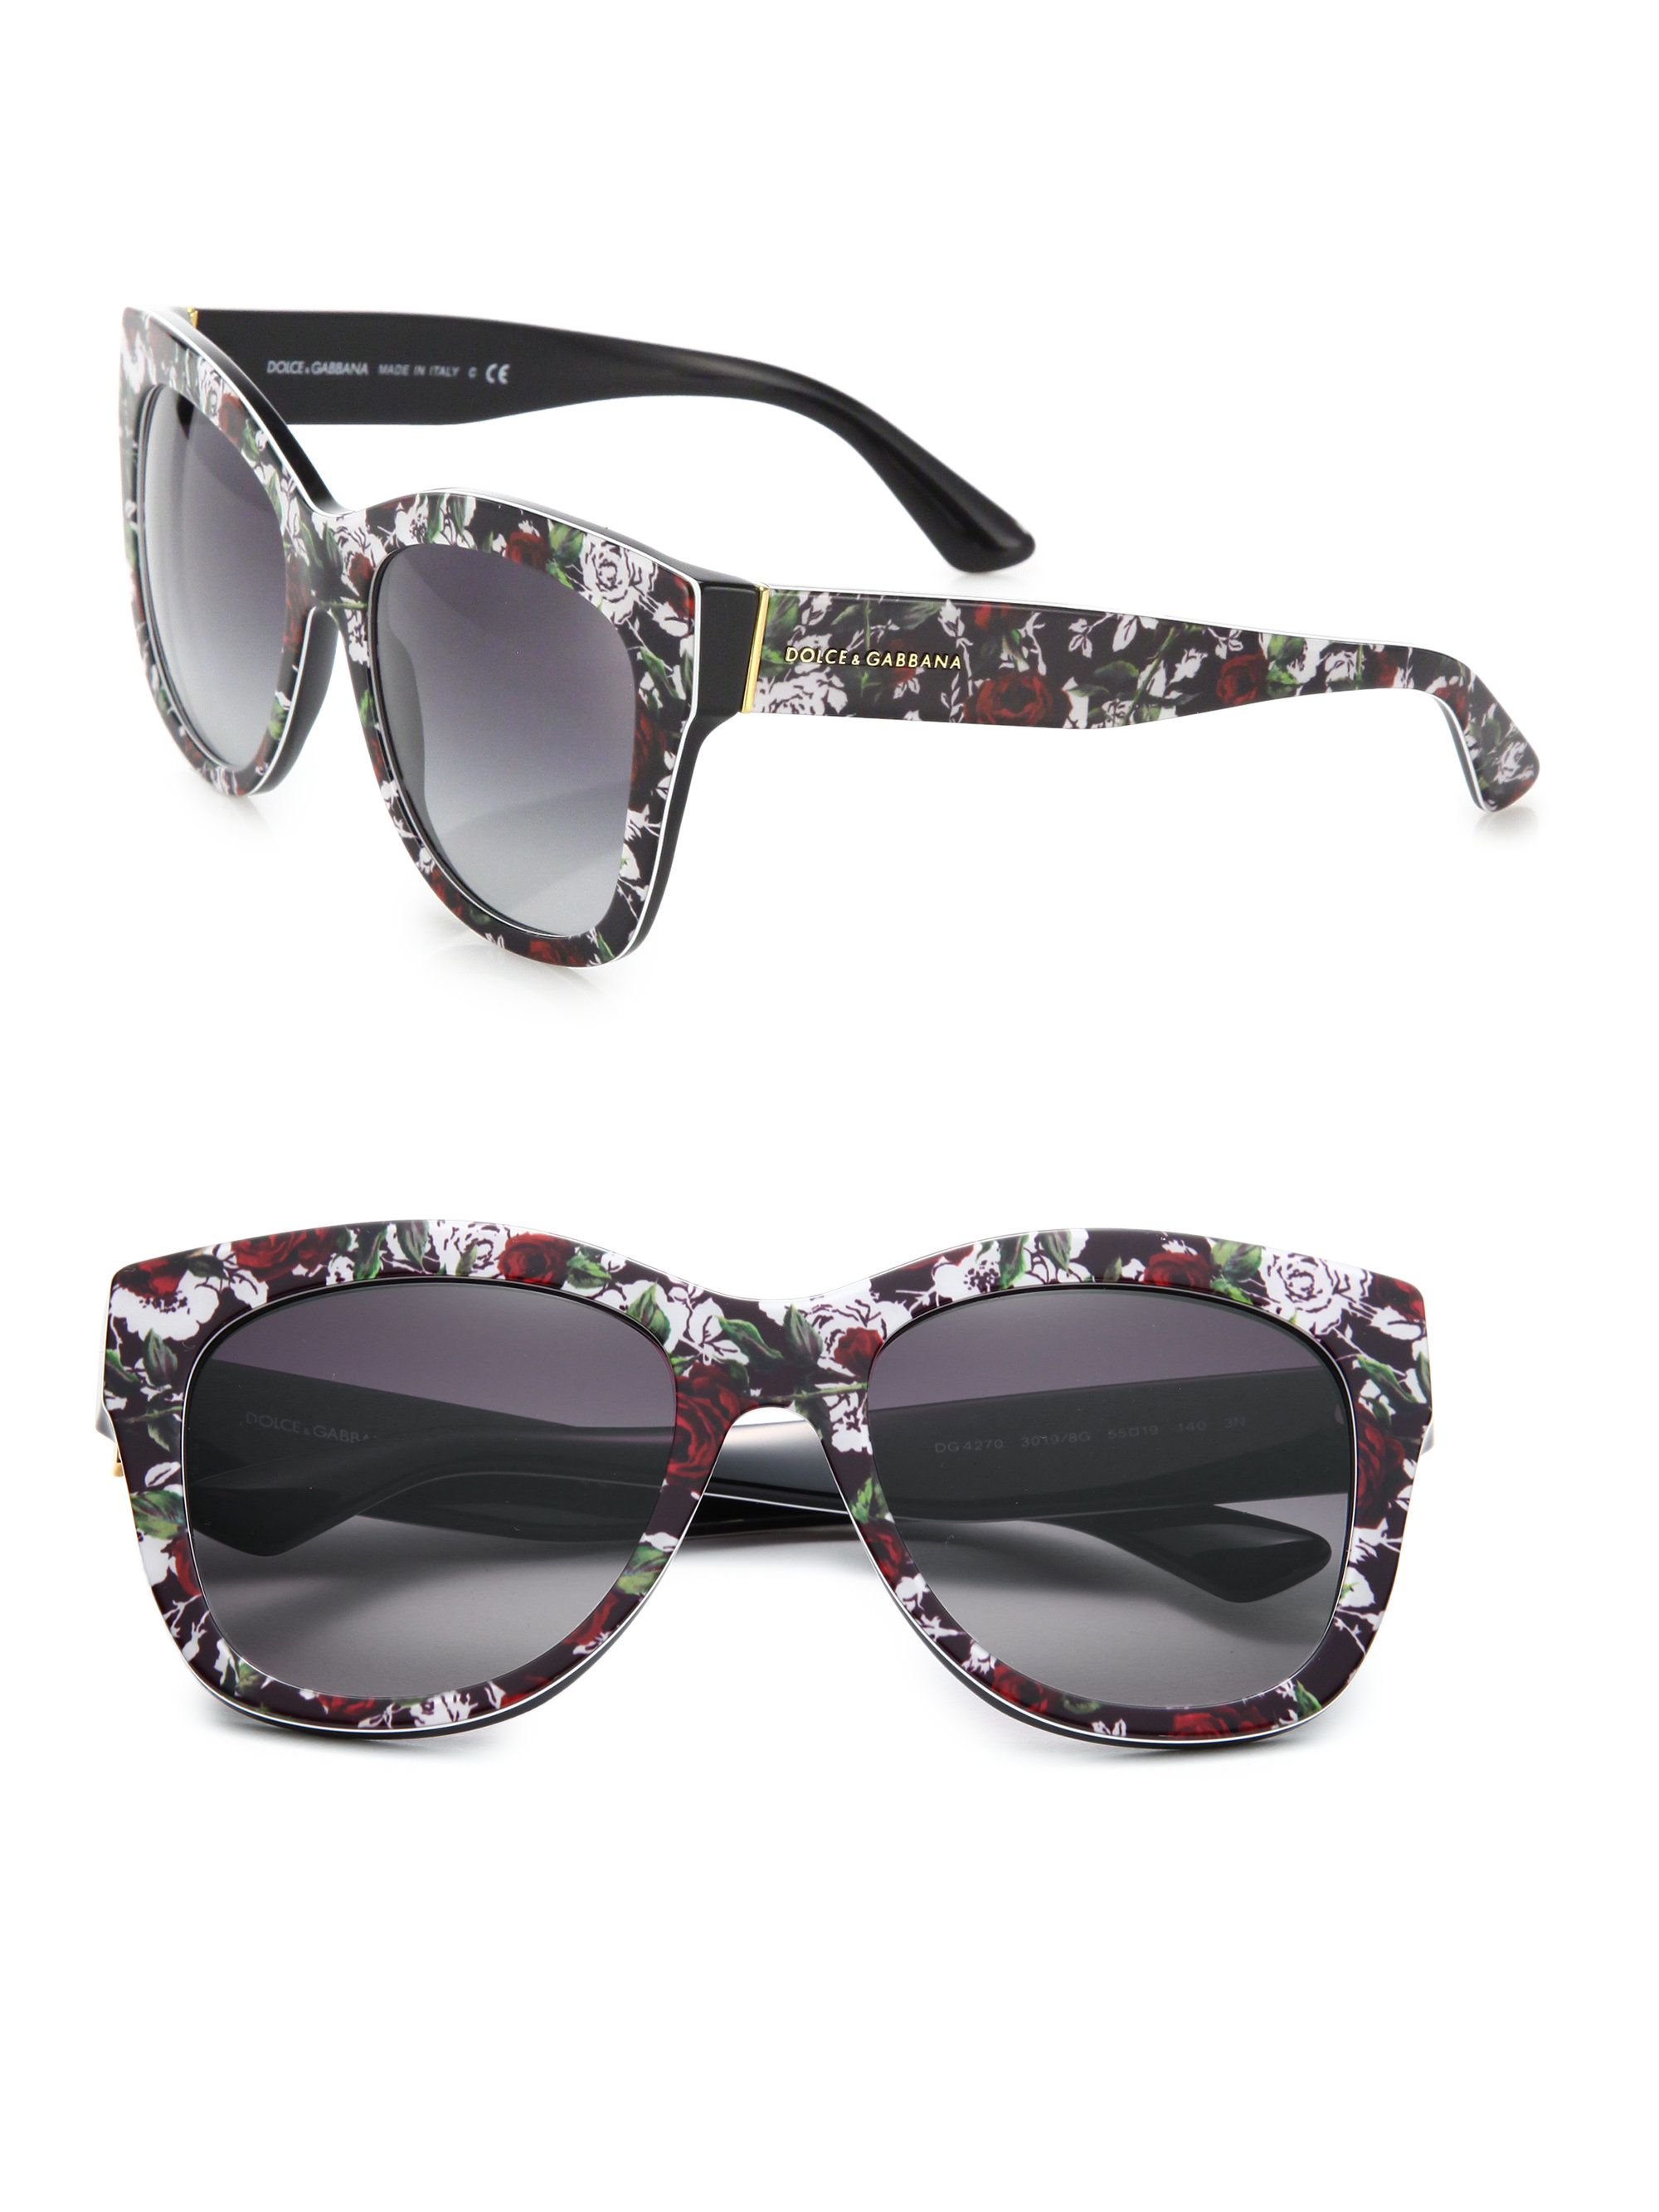 Dolce & gabbana 55mm Square Floral Acetate Sunglasses in Pink | Lyst